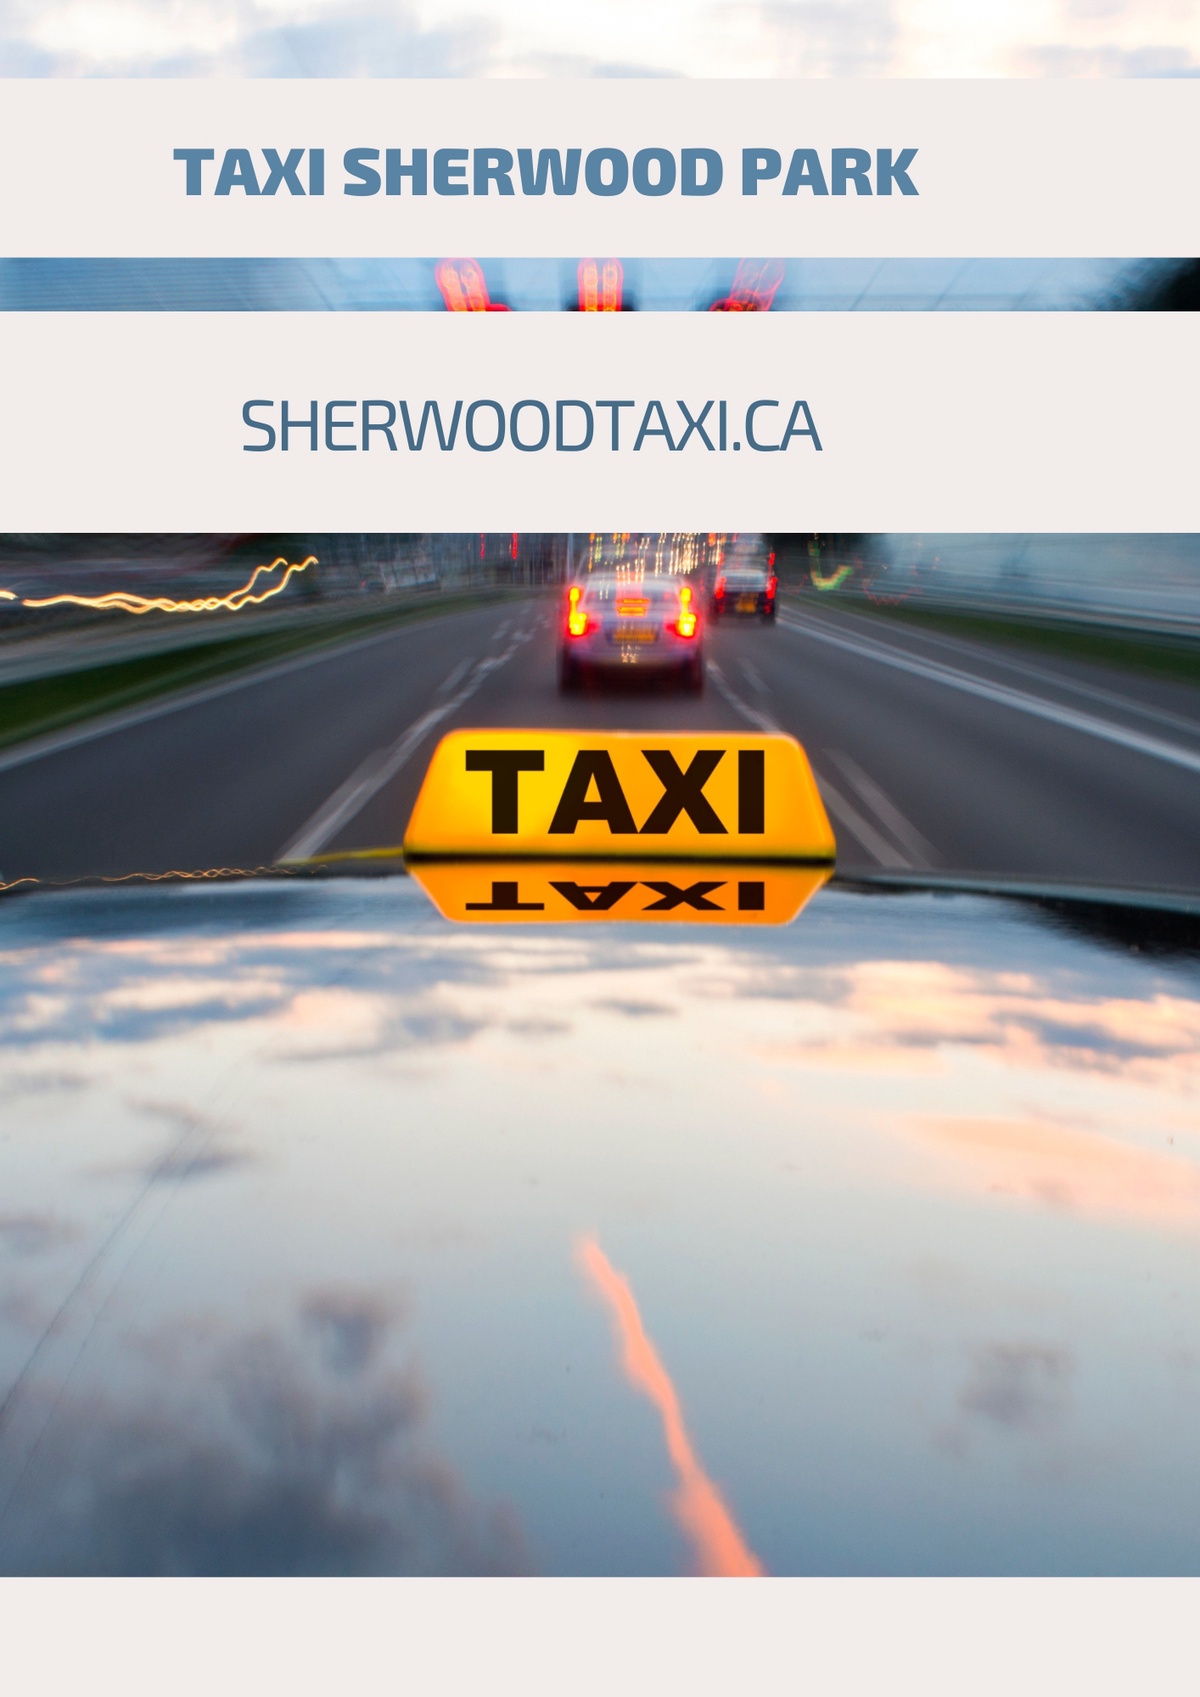 Why Choose Flat Ride Taxi Inc for Your  Taxi Sherwood Park Needs?